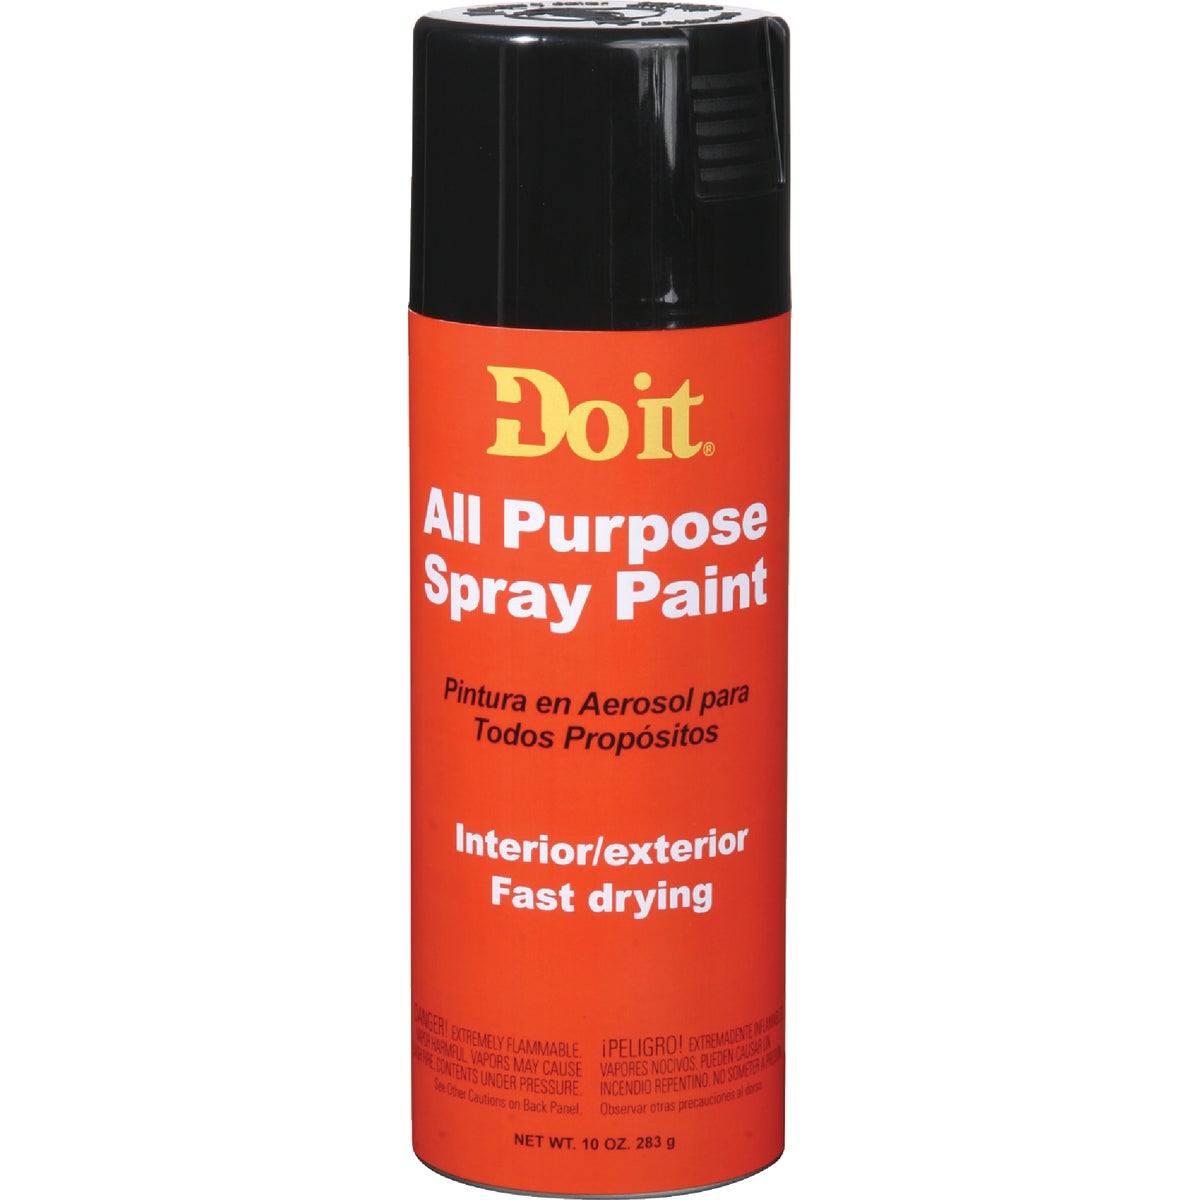 Item 770353, Fast-dry, multipurpose aerosol that provides a smooth gloss finish on wood